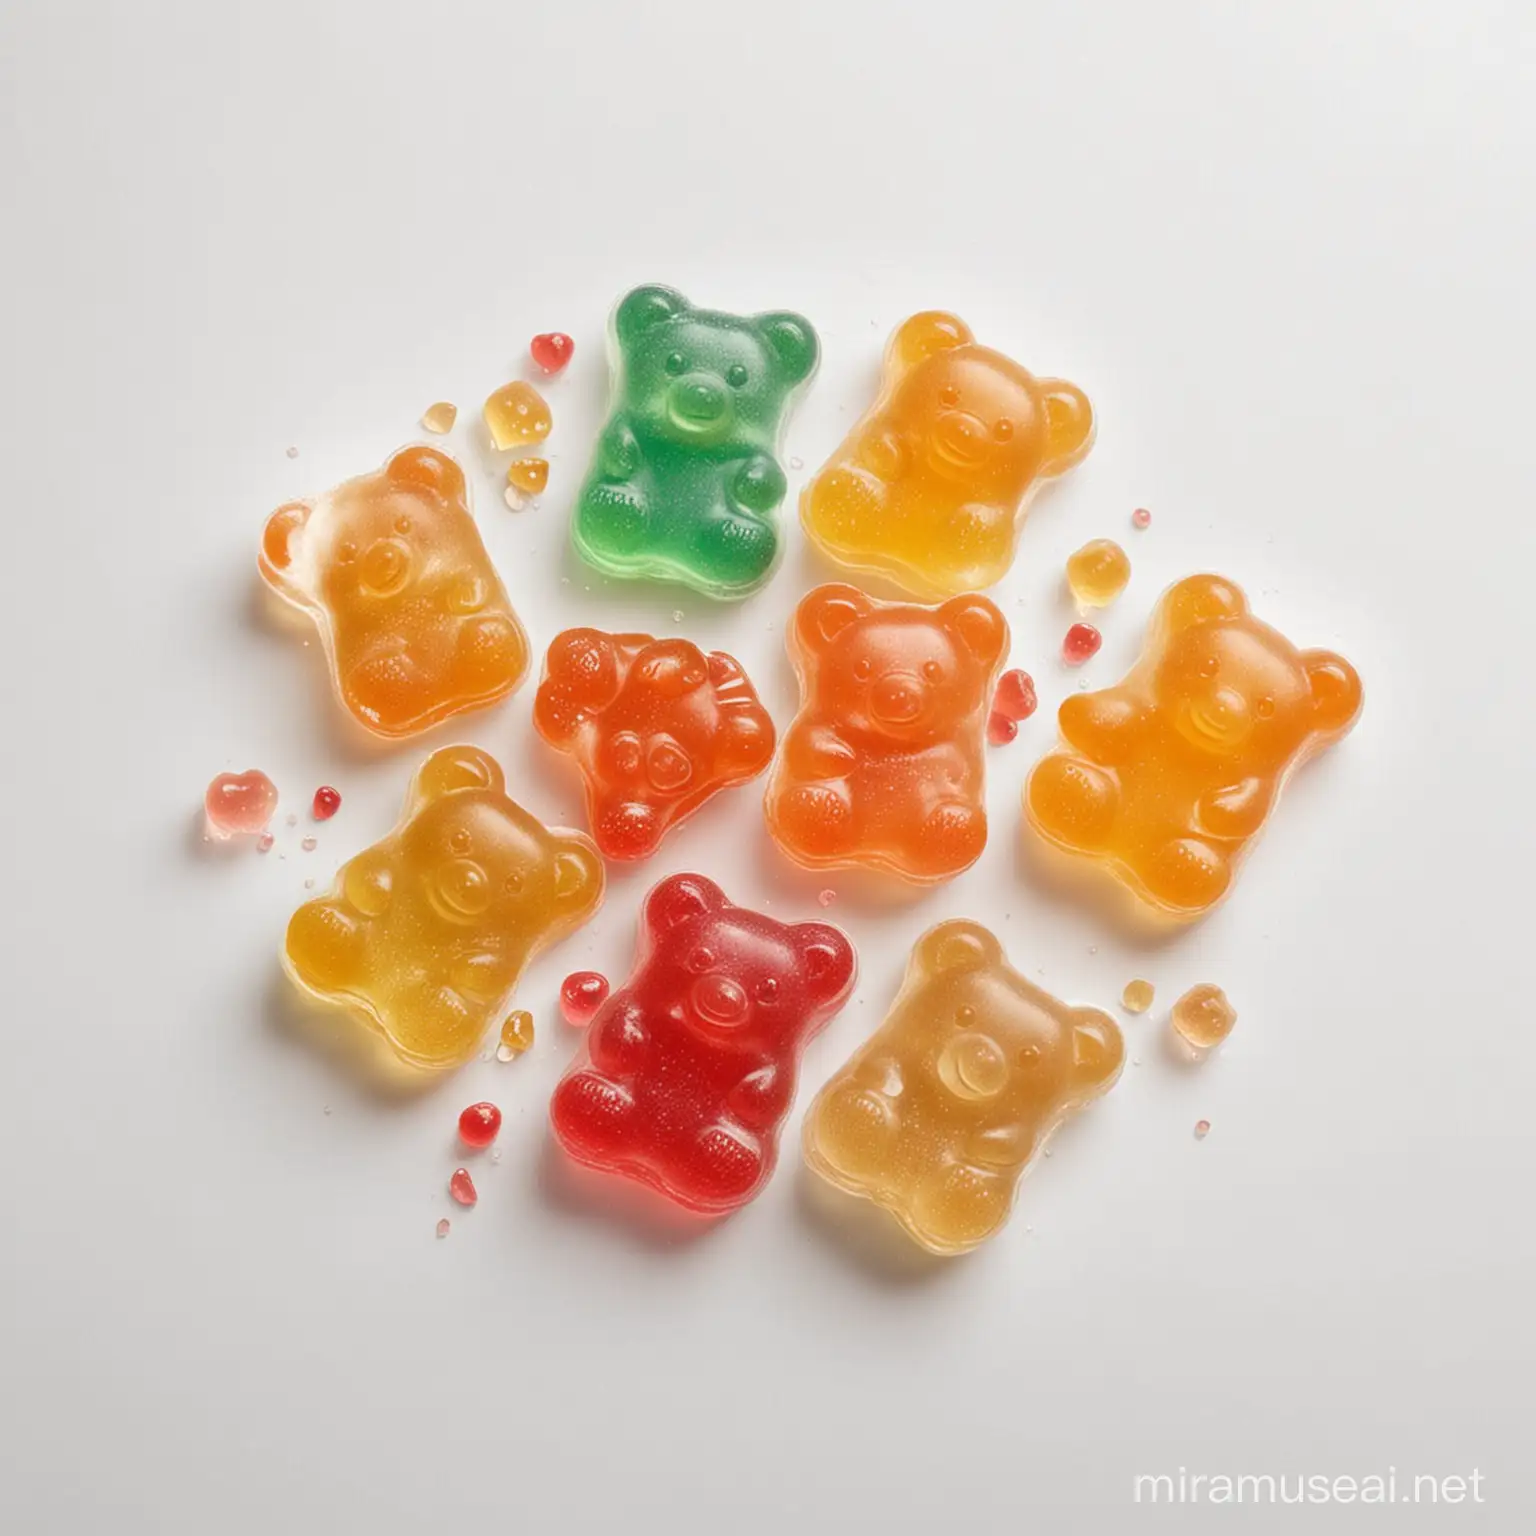 Colorful Melted Gummy Bears Vibrant Sweet Treats on White Background